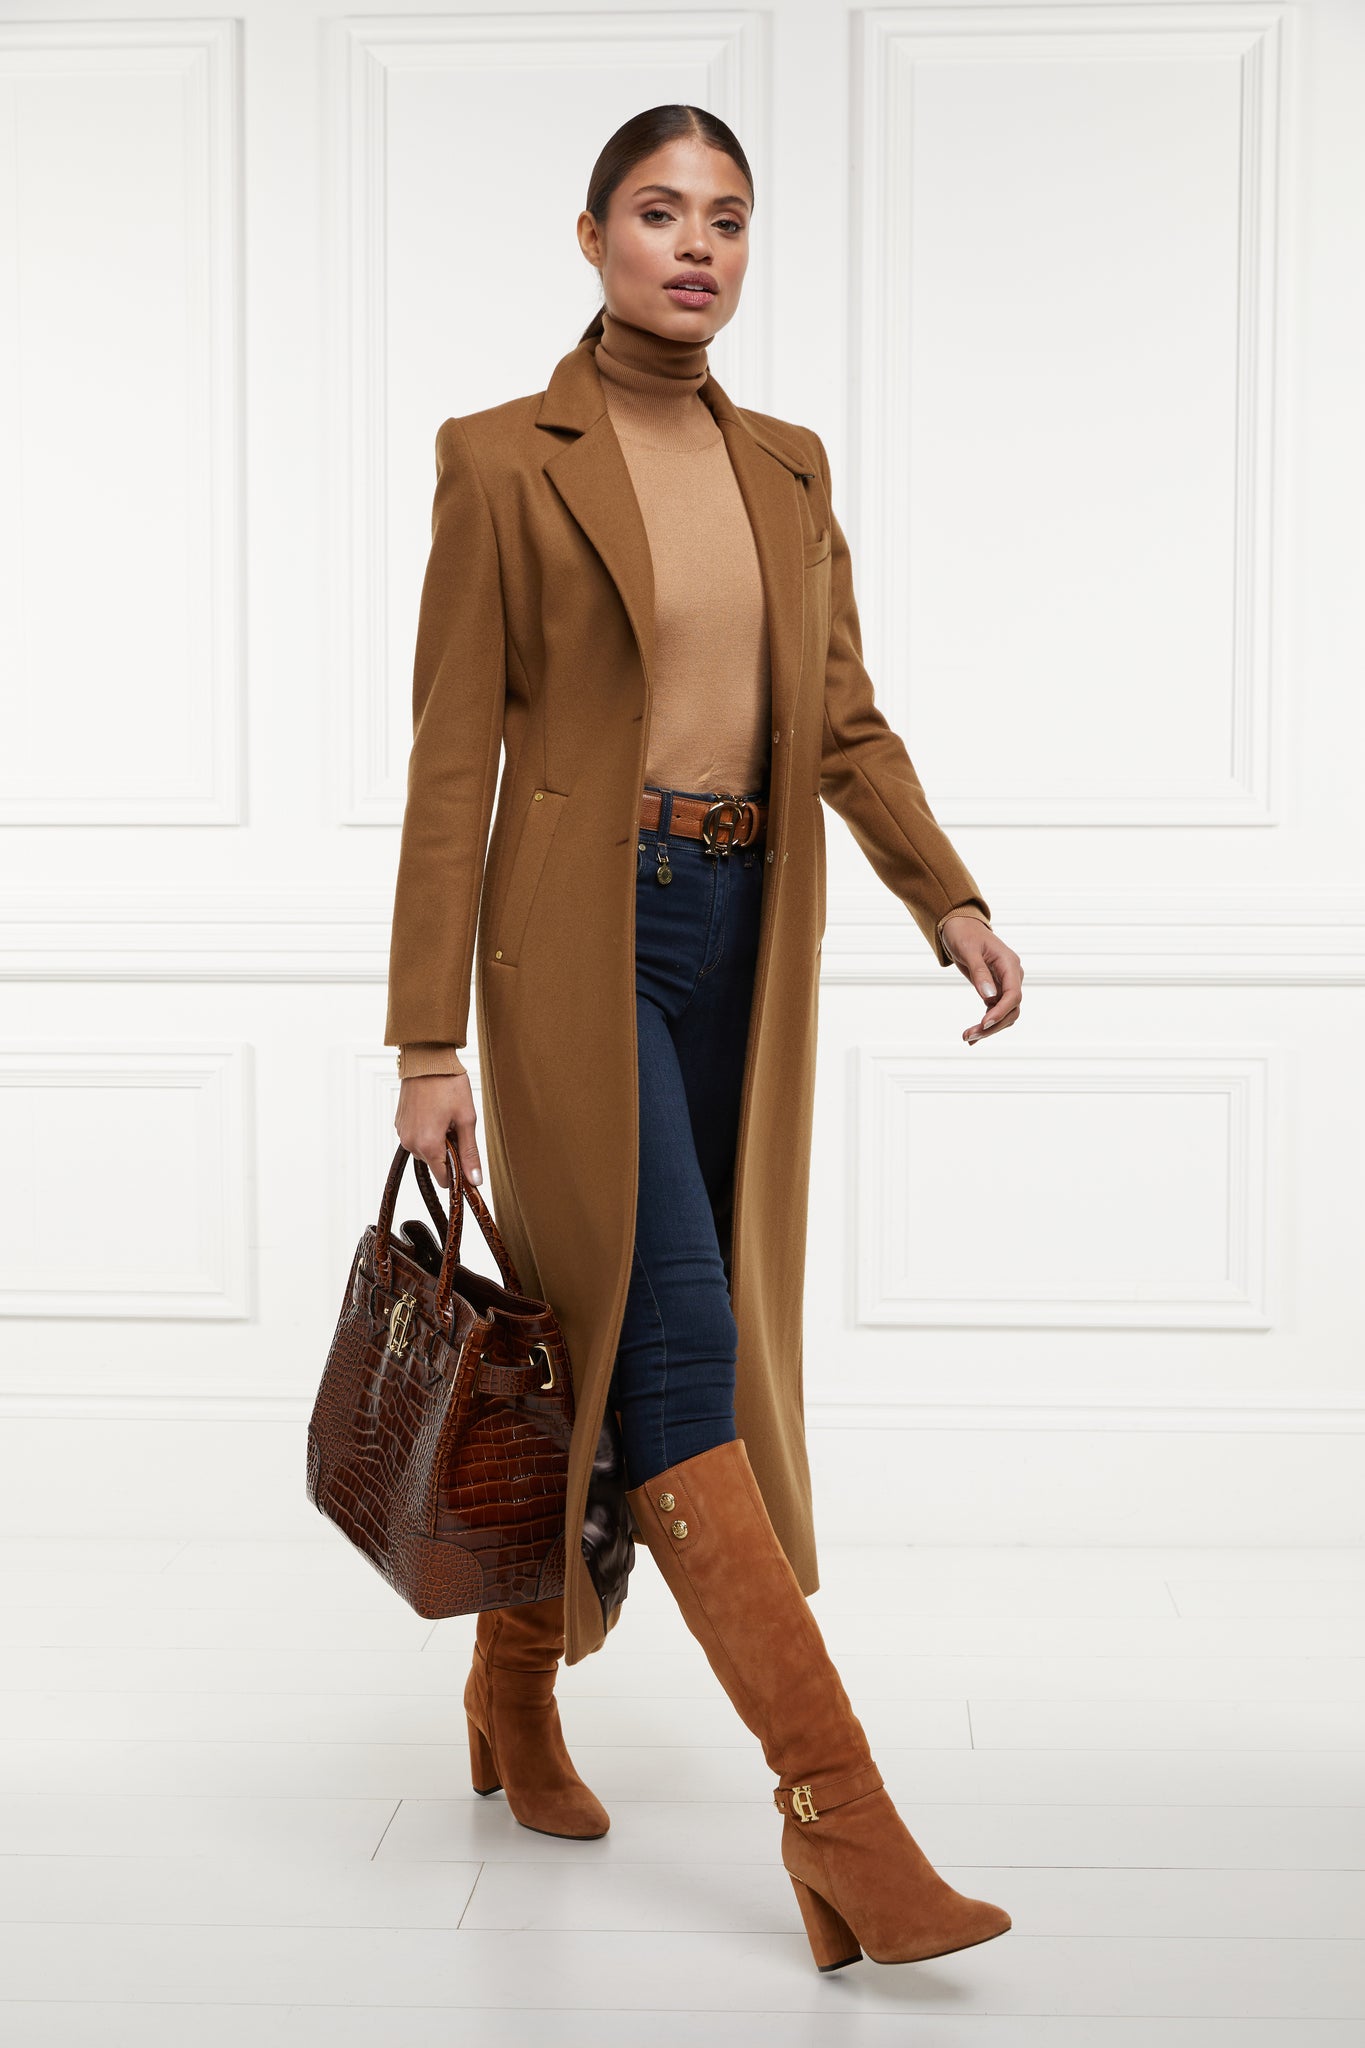 womens dark camel single breasted full length wool coat with tan croc embossed leather tote bag